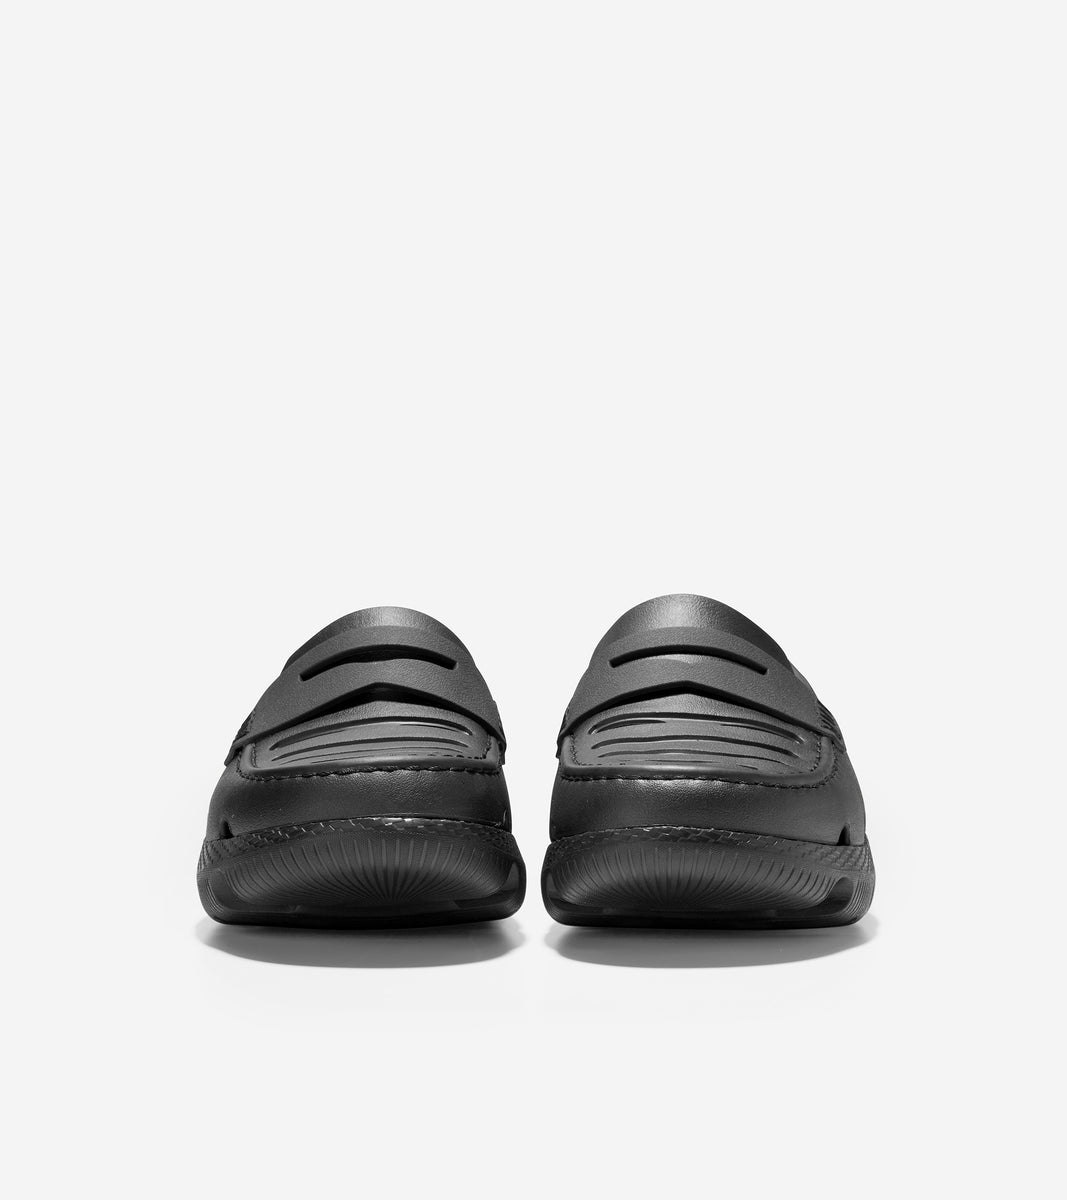 ColeHaan-4.ZEROGRAND All-Day Loafer-w23324-Black